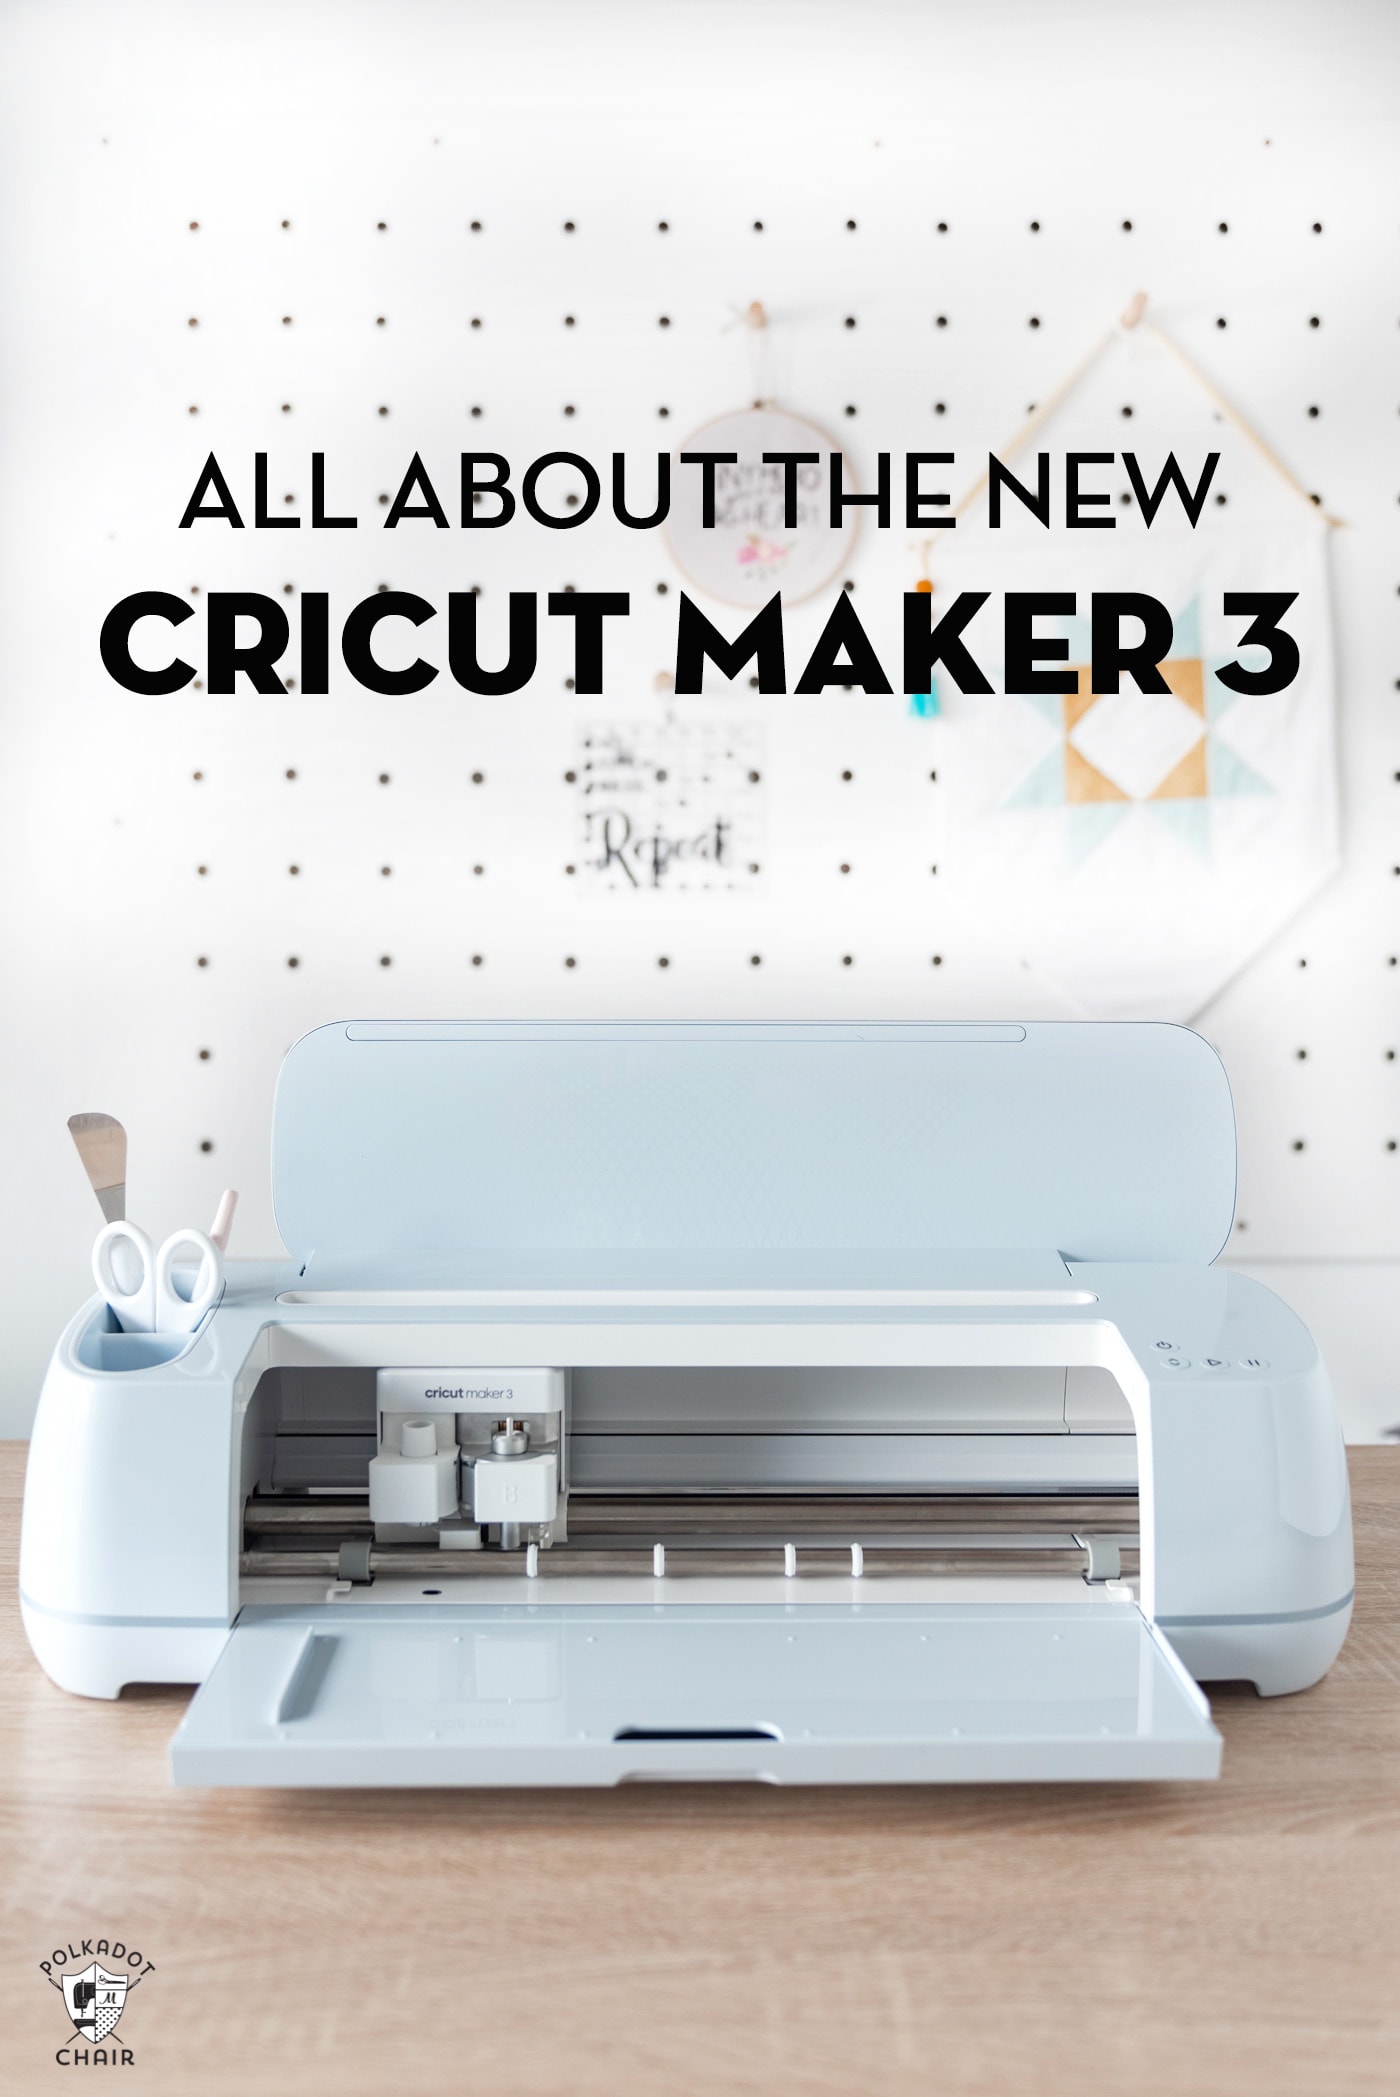 Cricut Maker 3 + Explore 3 change the crafting game - 9to5Toys